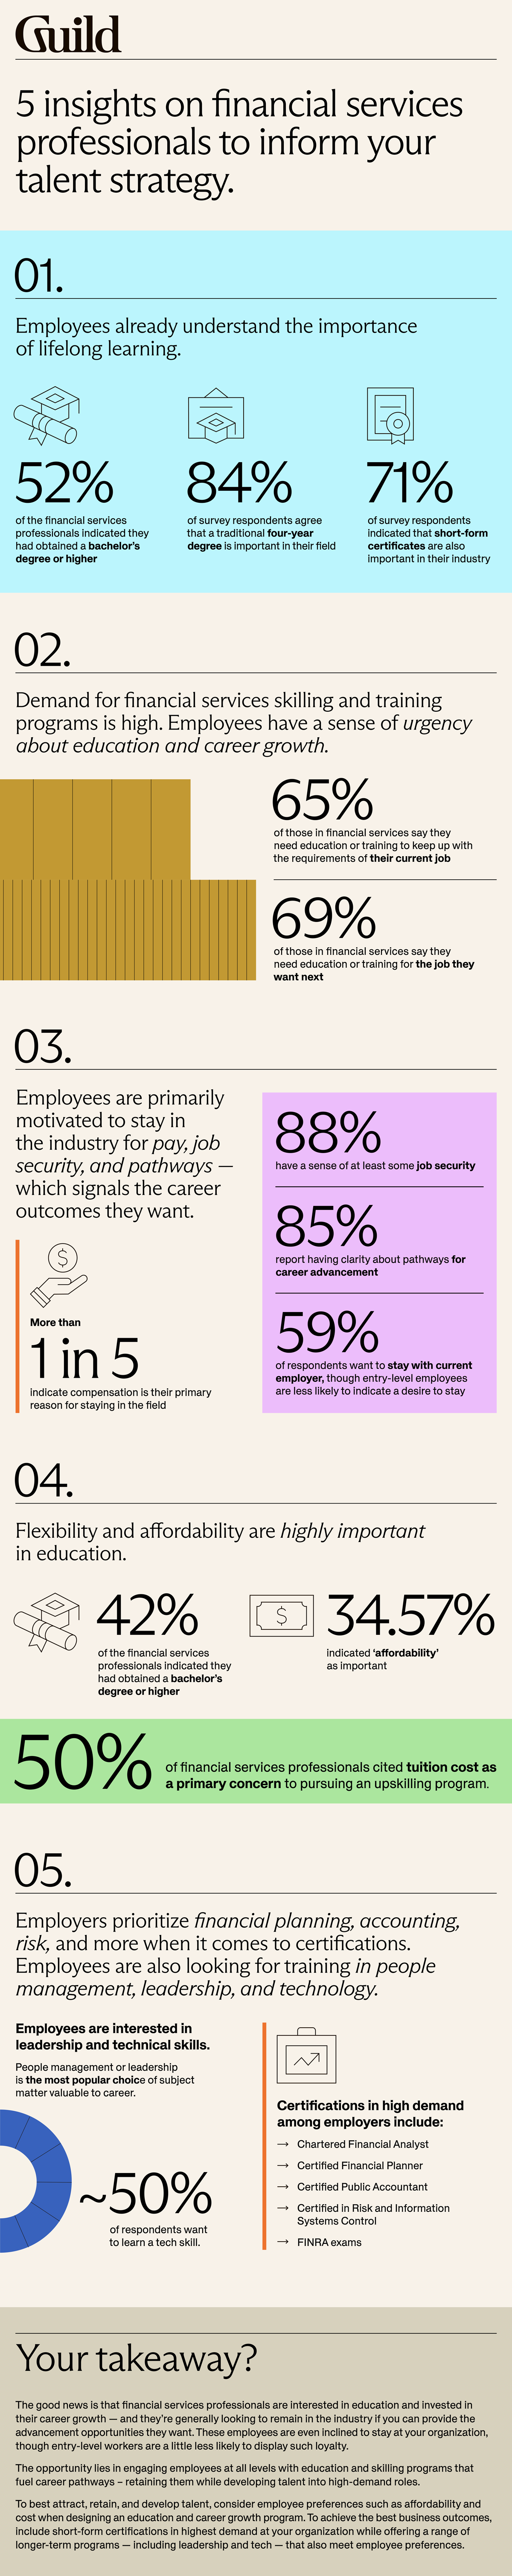 Infographic on 5 insights on financial services professionals to inform your talent strategy. 1. Employees already understand the importance of lifelong learning. 52% of the financial services professionals indicated they had obtained a bachelor’s degree or higher. 84% of survey respondents agree that a traditional four-year degree is important in their field. 71% of survey respondents indicated that short-form certificates are also important in their industry. 2. Demand for financial services skilling and training programs is high. Employees have a sense of urgency about education and career growth. 65% of those in financial services say they need education or training to keep up with the requirements of their current job. 69% of those in financial services say they need education or training for the job they want next. 3. Employees are primarily motivated to stay in the industry for pay, job security, and pathways- which signals the career outcomes they want. More than 1 in 5 indicate compensation is their primary reason for staying in the field. 88% have a sense of at least some job security. 85% report having clarity about pathways for career advancement. 59% of respondents want to stay with their current employer, though entry-level employees are less likely to indicate a desire to stay. 4. Flexibility and affordability are highly important in education. 42% of the financial services professionals indicated they had obtained a bachelor’s degree or higher. 34.57% indicated “affordability” as important. 50% of financial services professionals cited tuition costs as a primary concern to pursing an upskilling program. 5. Employers prioritize financial planning, accounting, risk, and more when it comes to certifications. Employees are also looking for training in people management, leadership, and technology. Employees are interested in leadership and technical skills. People management or leadership is the most popular choice of subject matter valuable to career. 50% of respondents want to learn a tech skill.